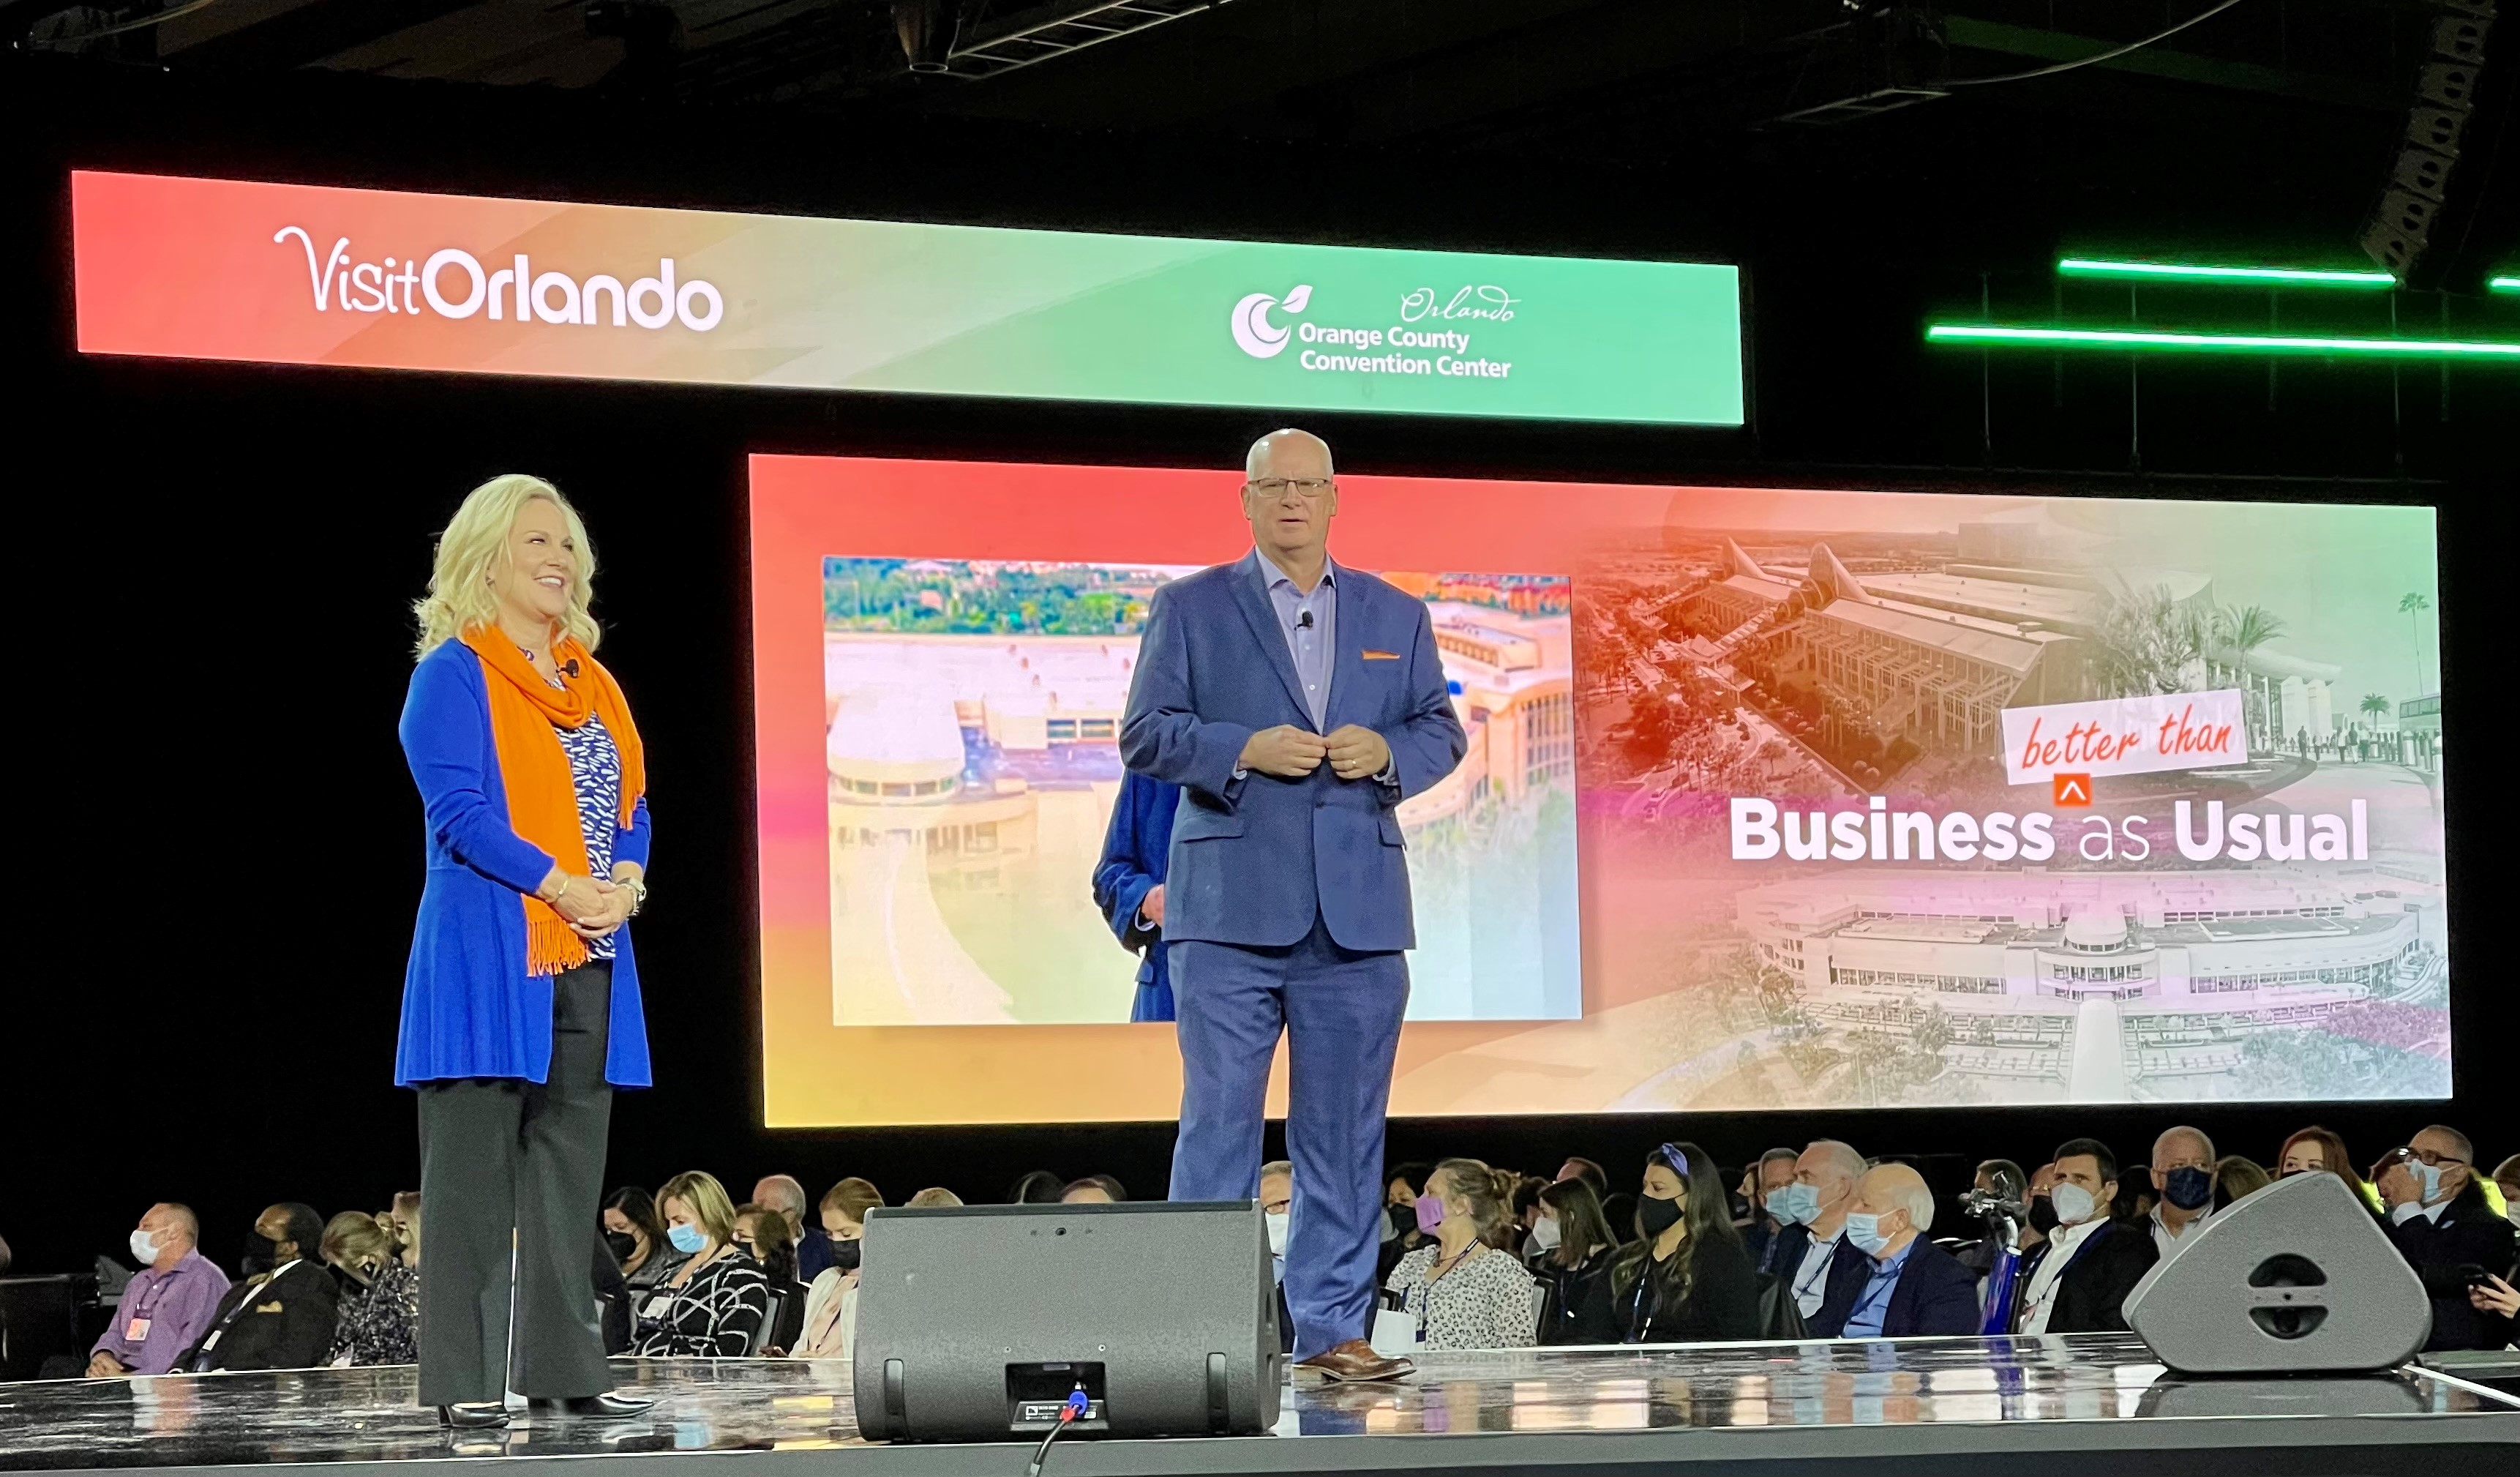 Visit Orlando President and CEO Casandra Matej and OCCC Executive Director Mark Tester join the main stage to speak on how Orlando has emerged as a recovery leader.